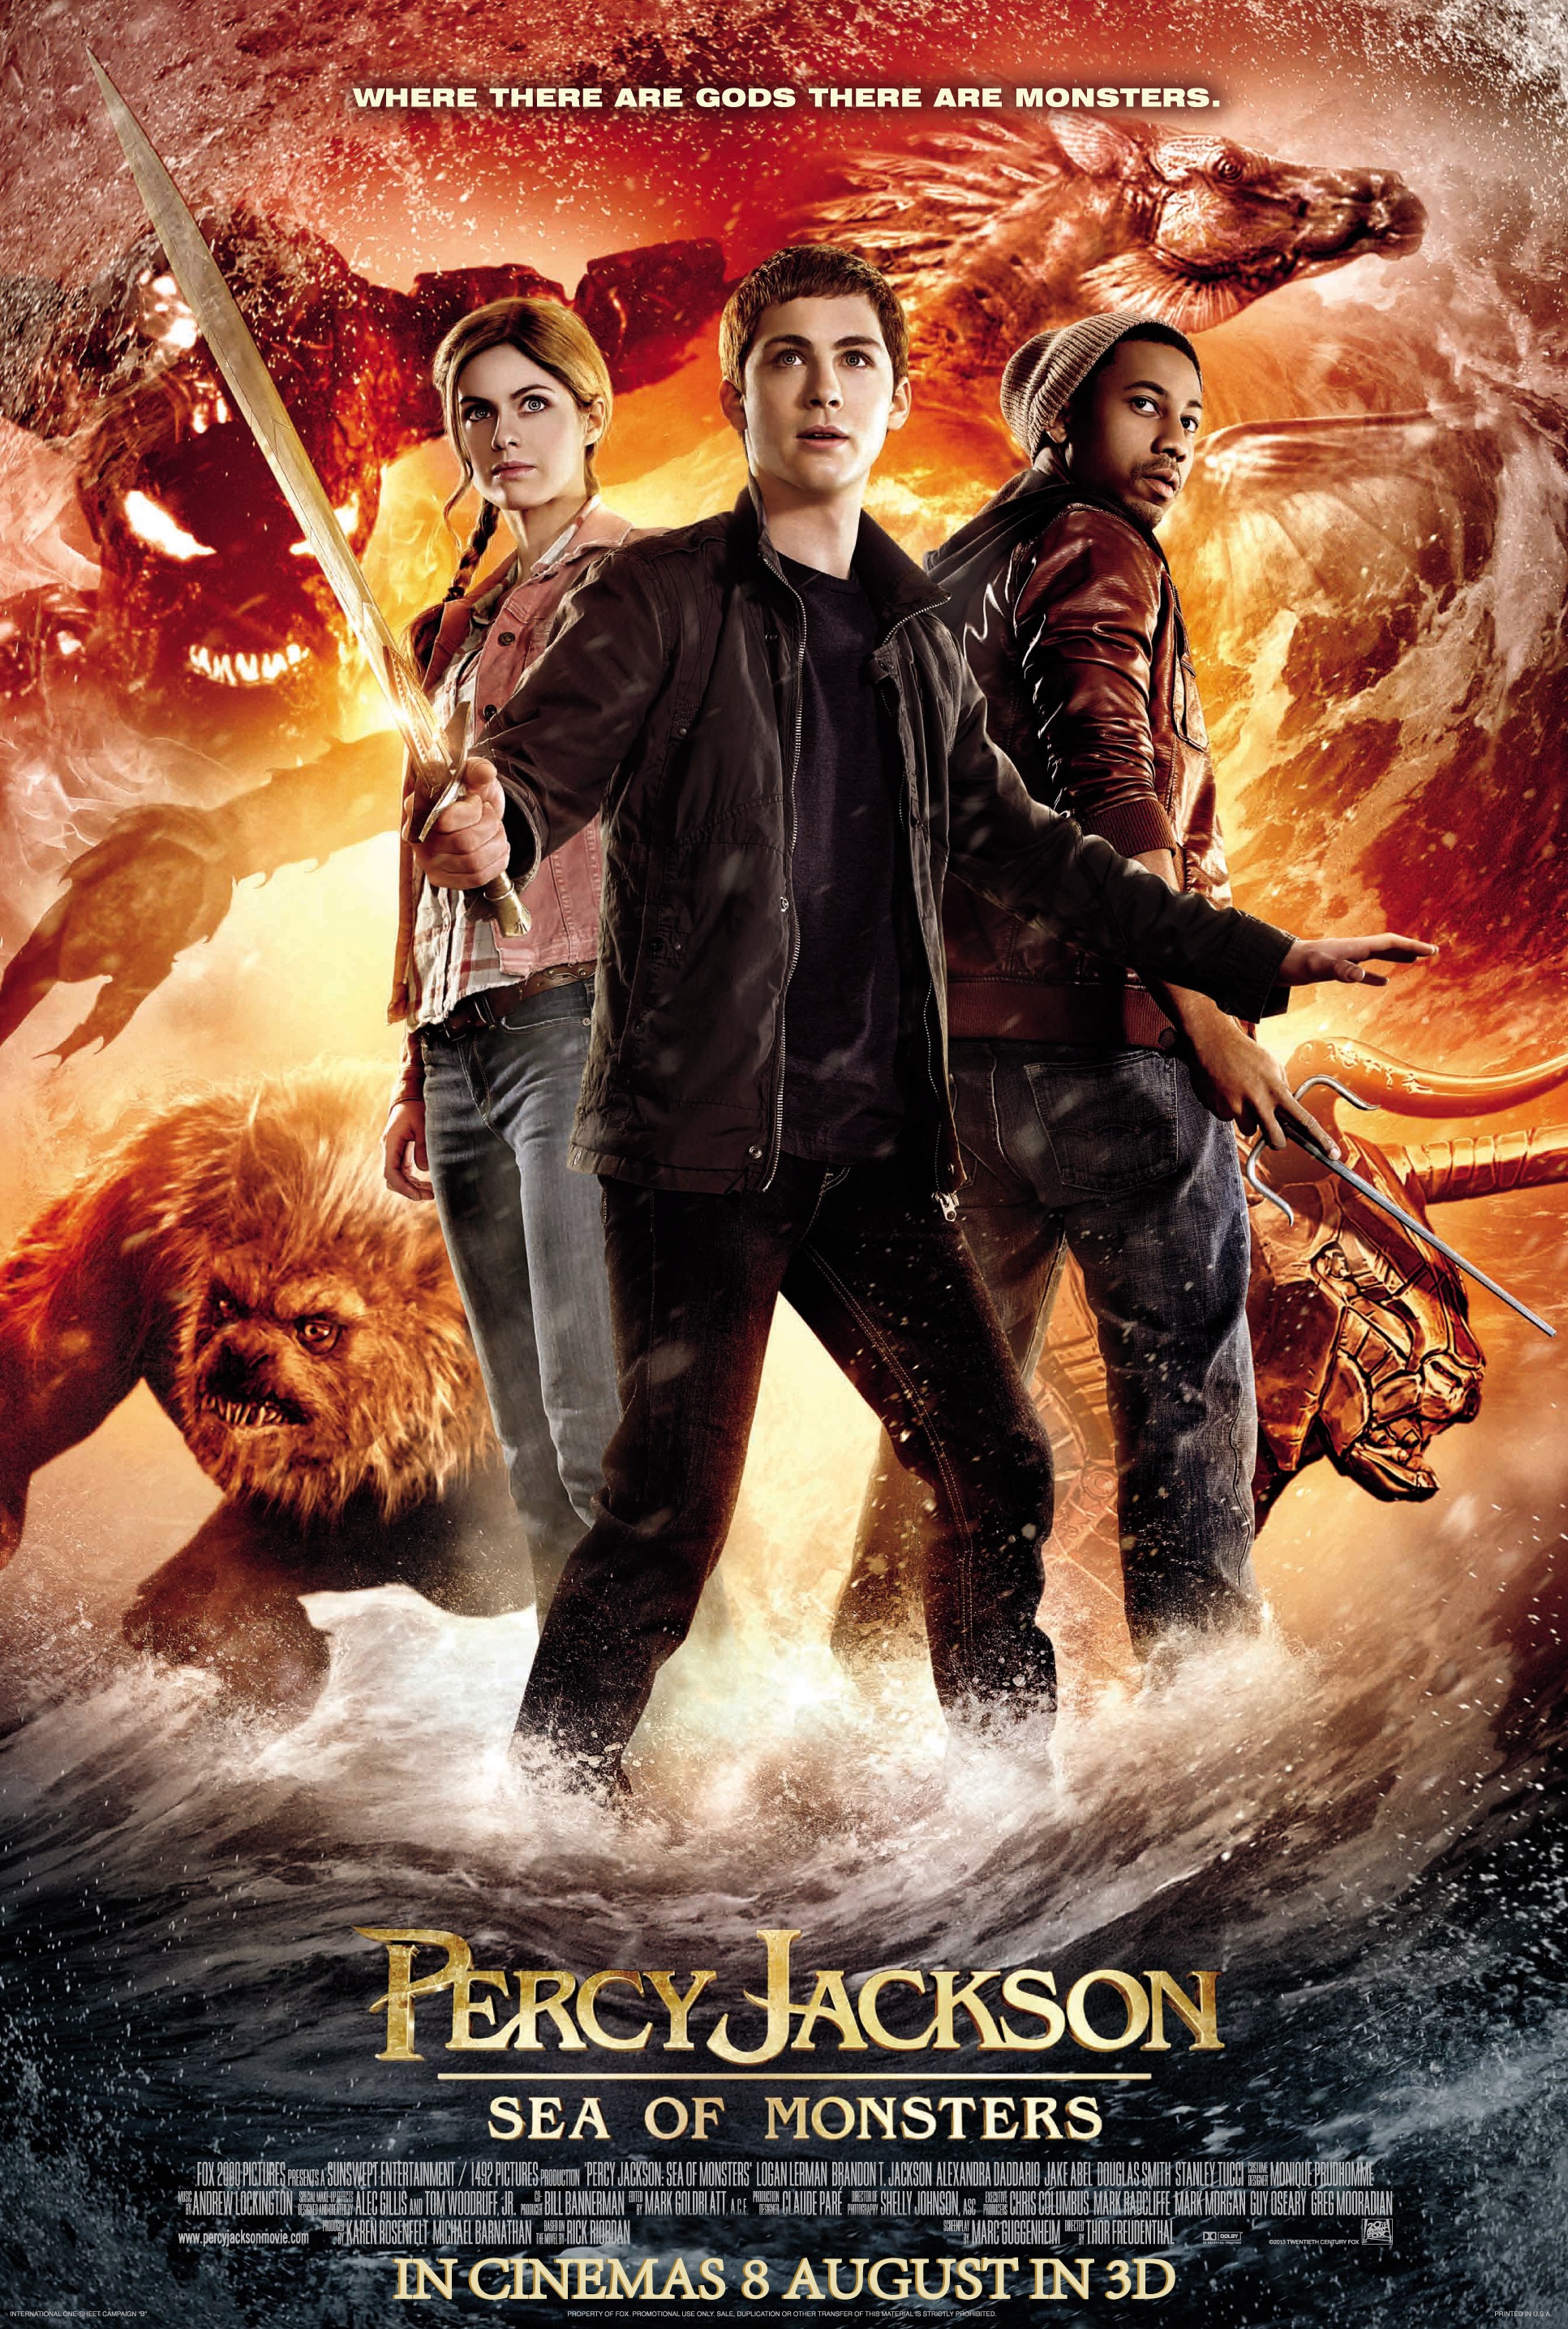 percy jackson full movie in hindi dubbed free download 720p